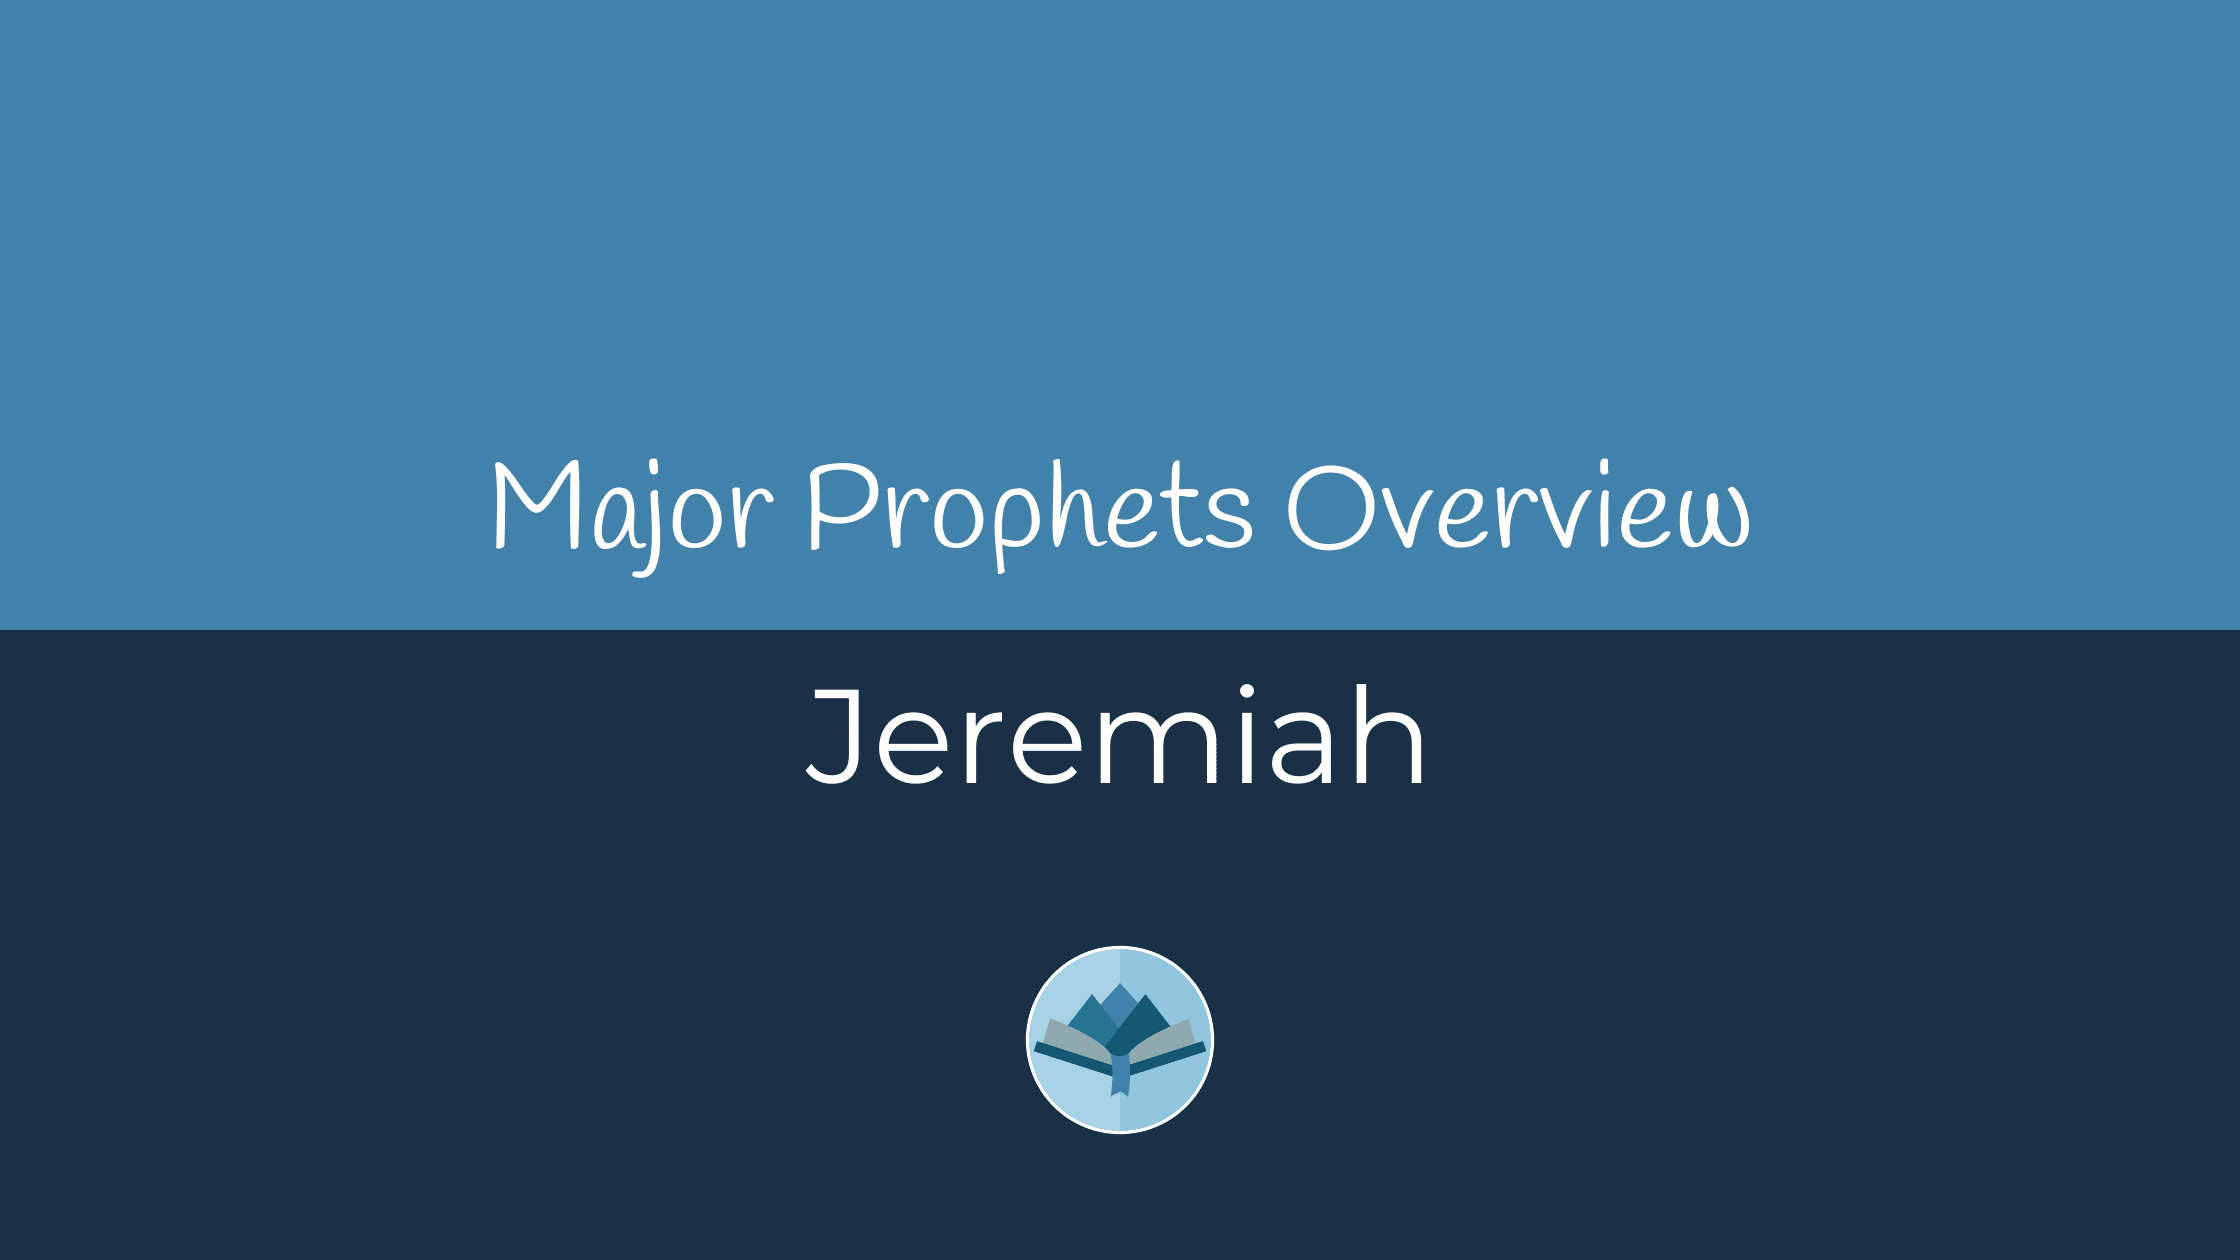 Jeremiah Overview